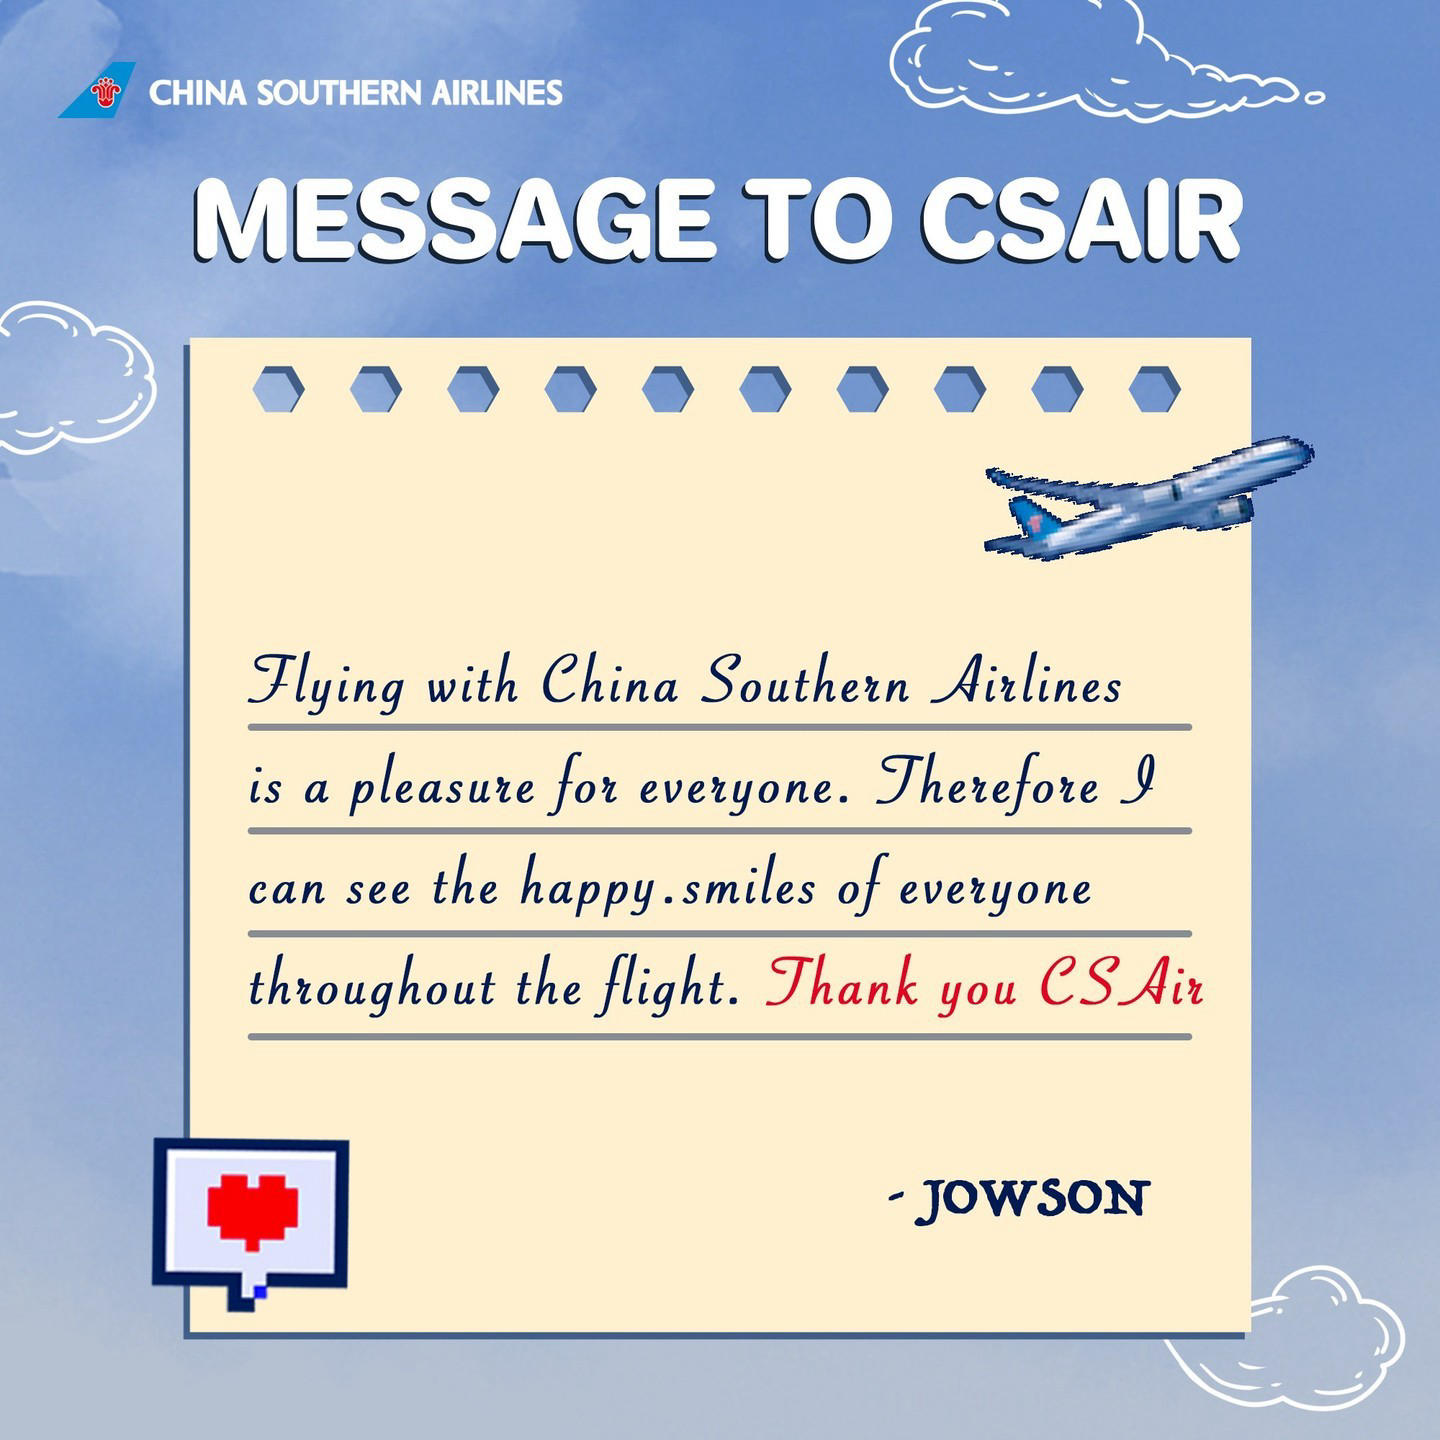 China Southern Airlines - Winter or Summer, rain or snow, your China Southern Airlines flight crew w